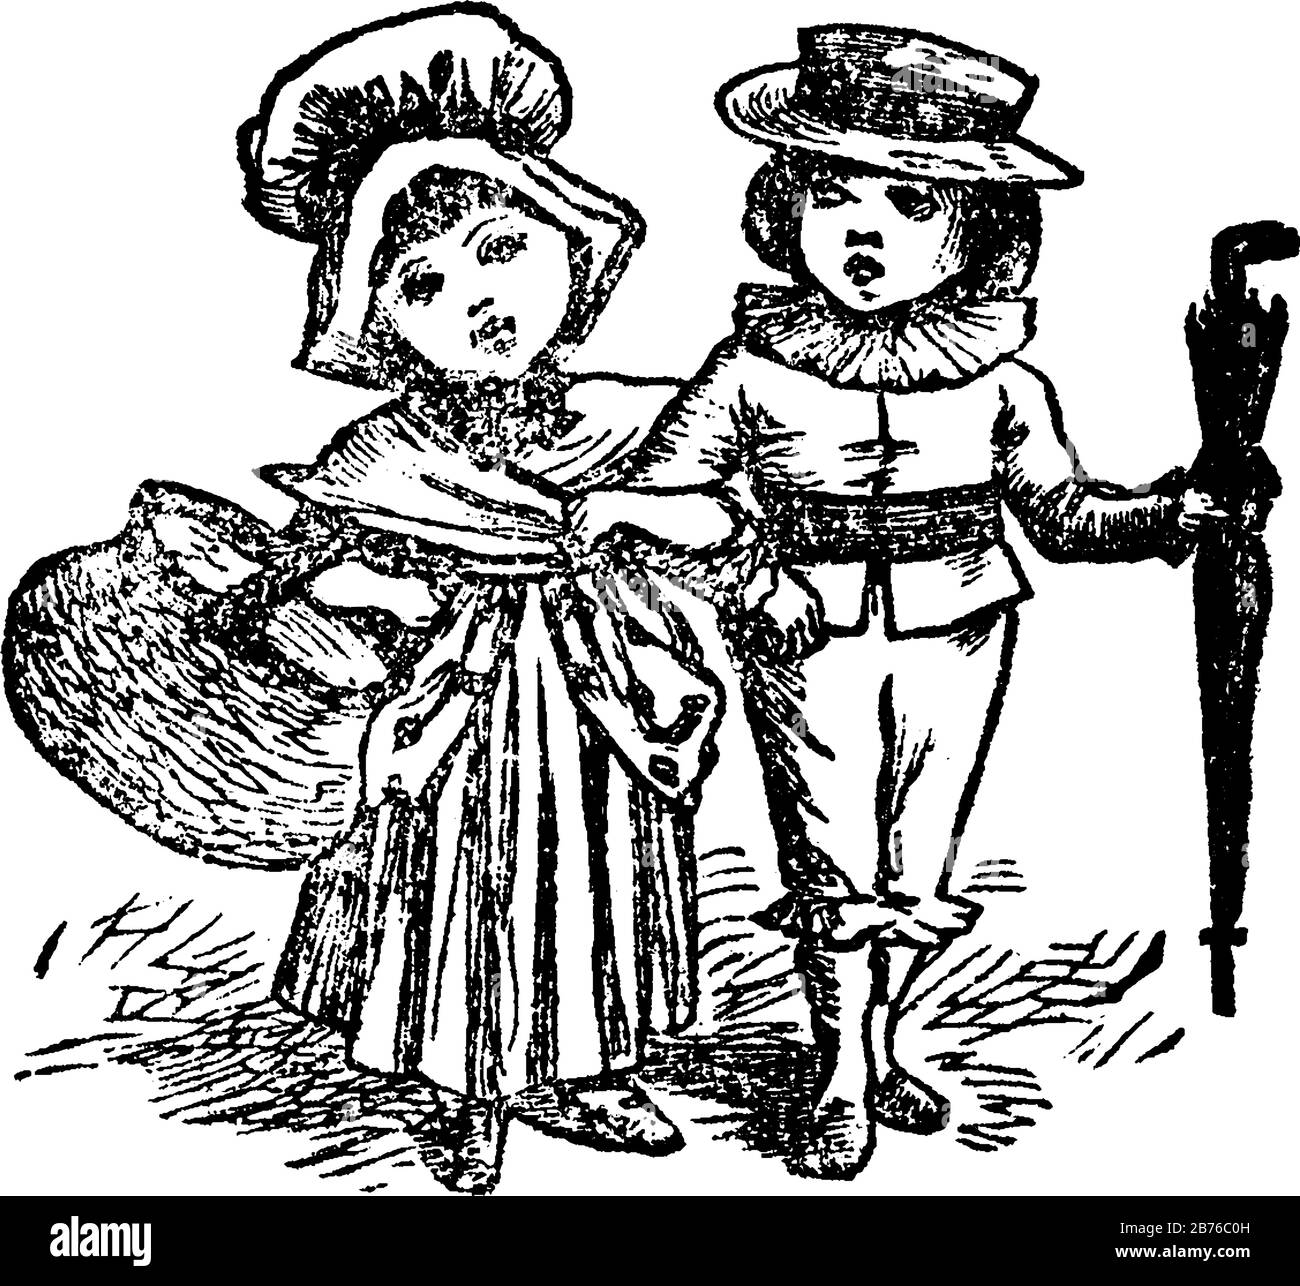 Two children holding hands and walking on road, a child holding basket in one hand and another child holding umbrella in hand, vintage line drawing or Stock Vector